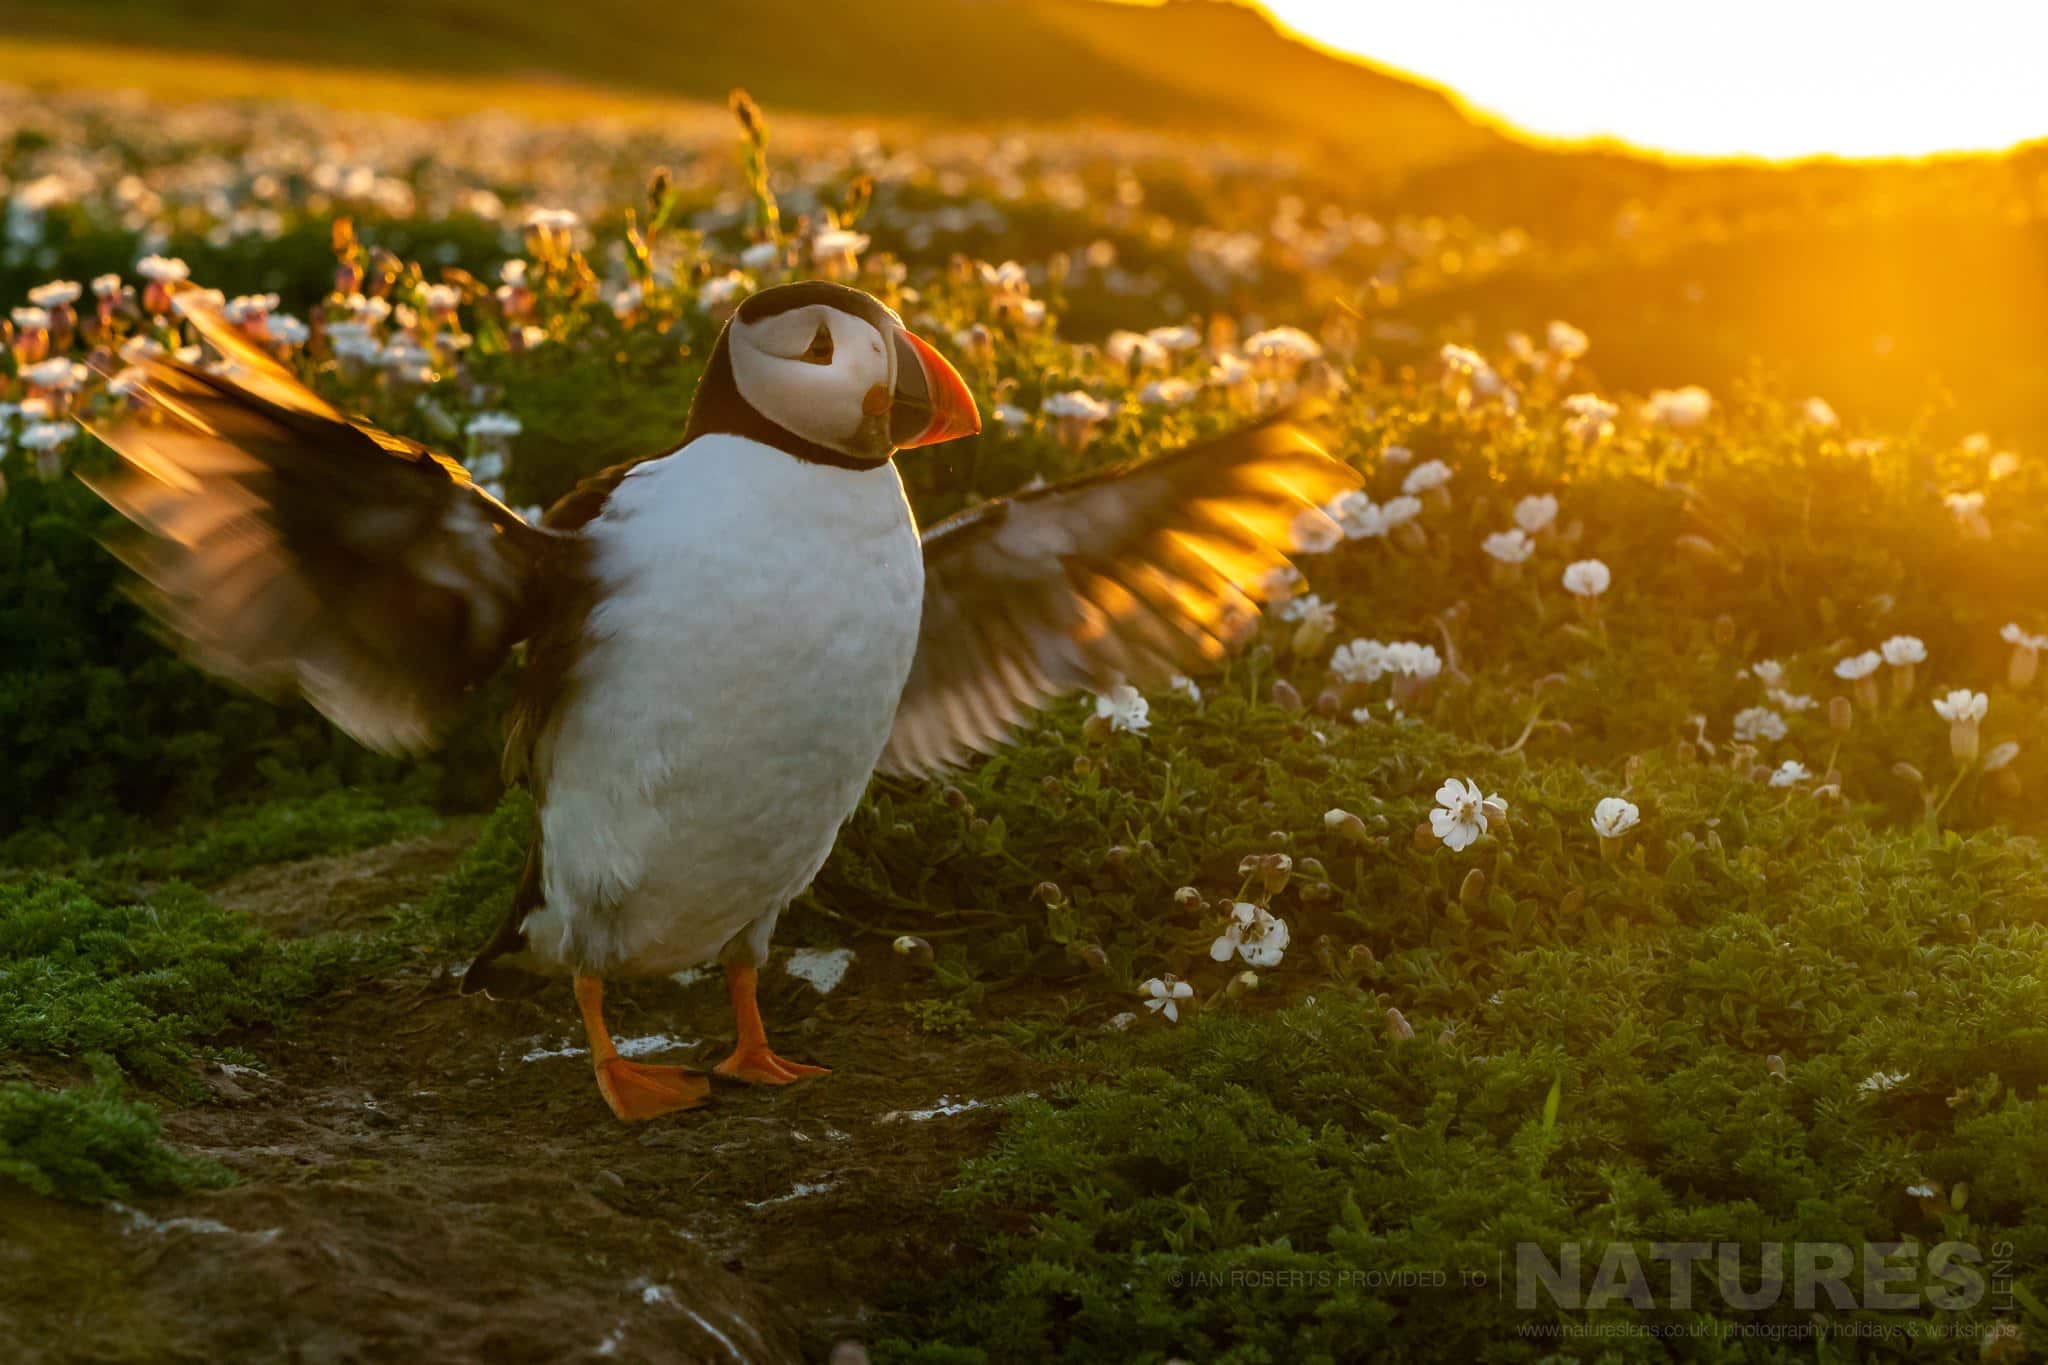 A Puffin Stretches It'S Wings, Illuminated From Behind By The Rising Sun This Image Was Captured By Ian Roberts During The Natureslens Welsh Puffins Of Skomer Island Photography Holiday